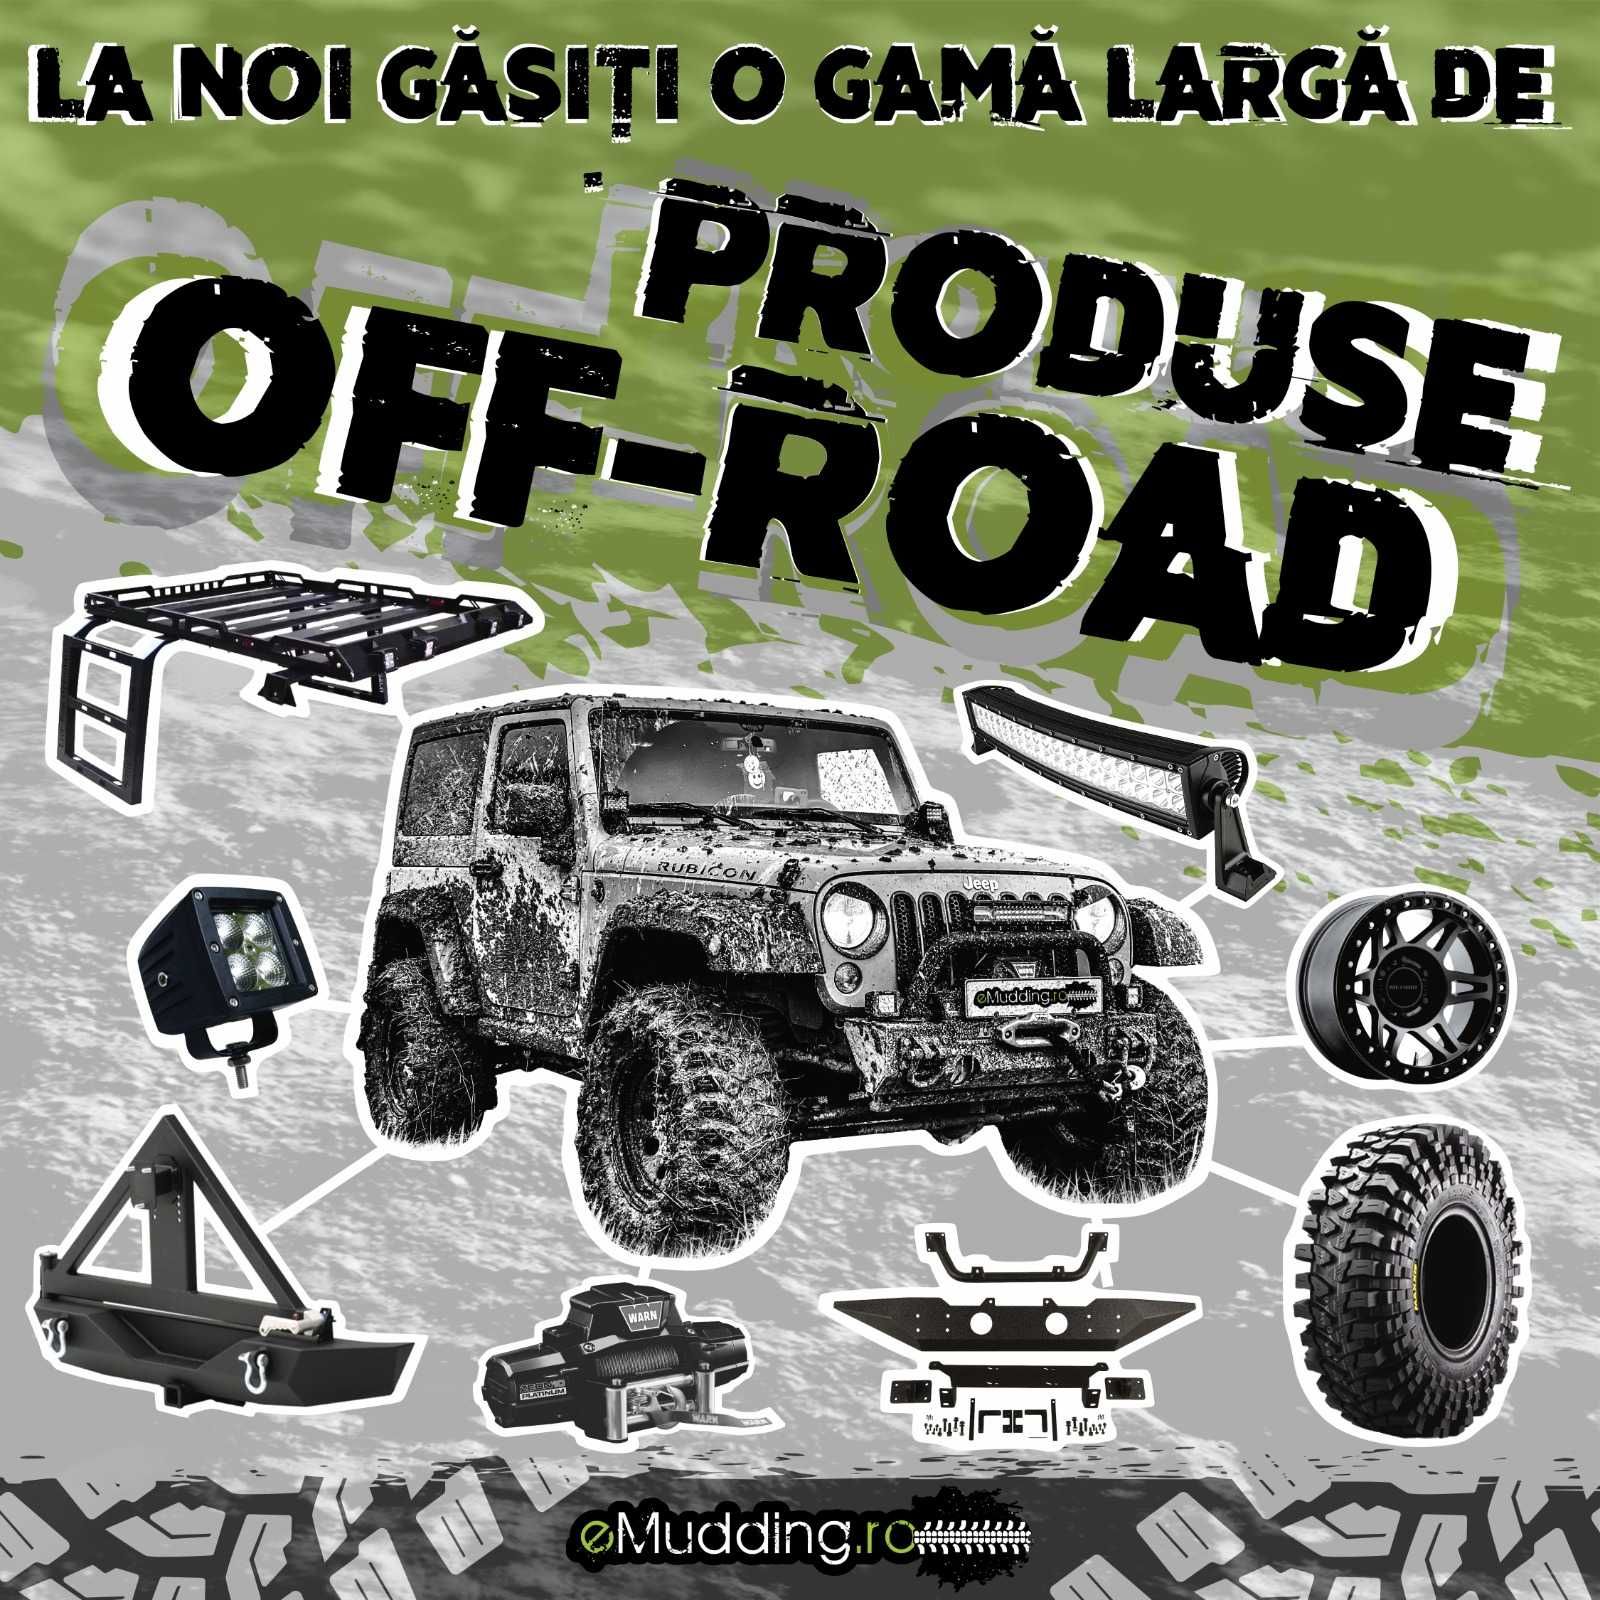 31x10.5R16 Anvelopa OFF-ROAD CST by MAXXIS M+S cu profil SIMEX